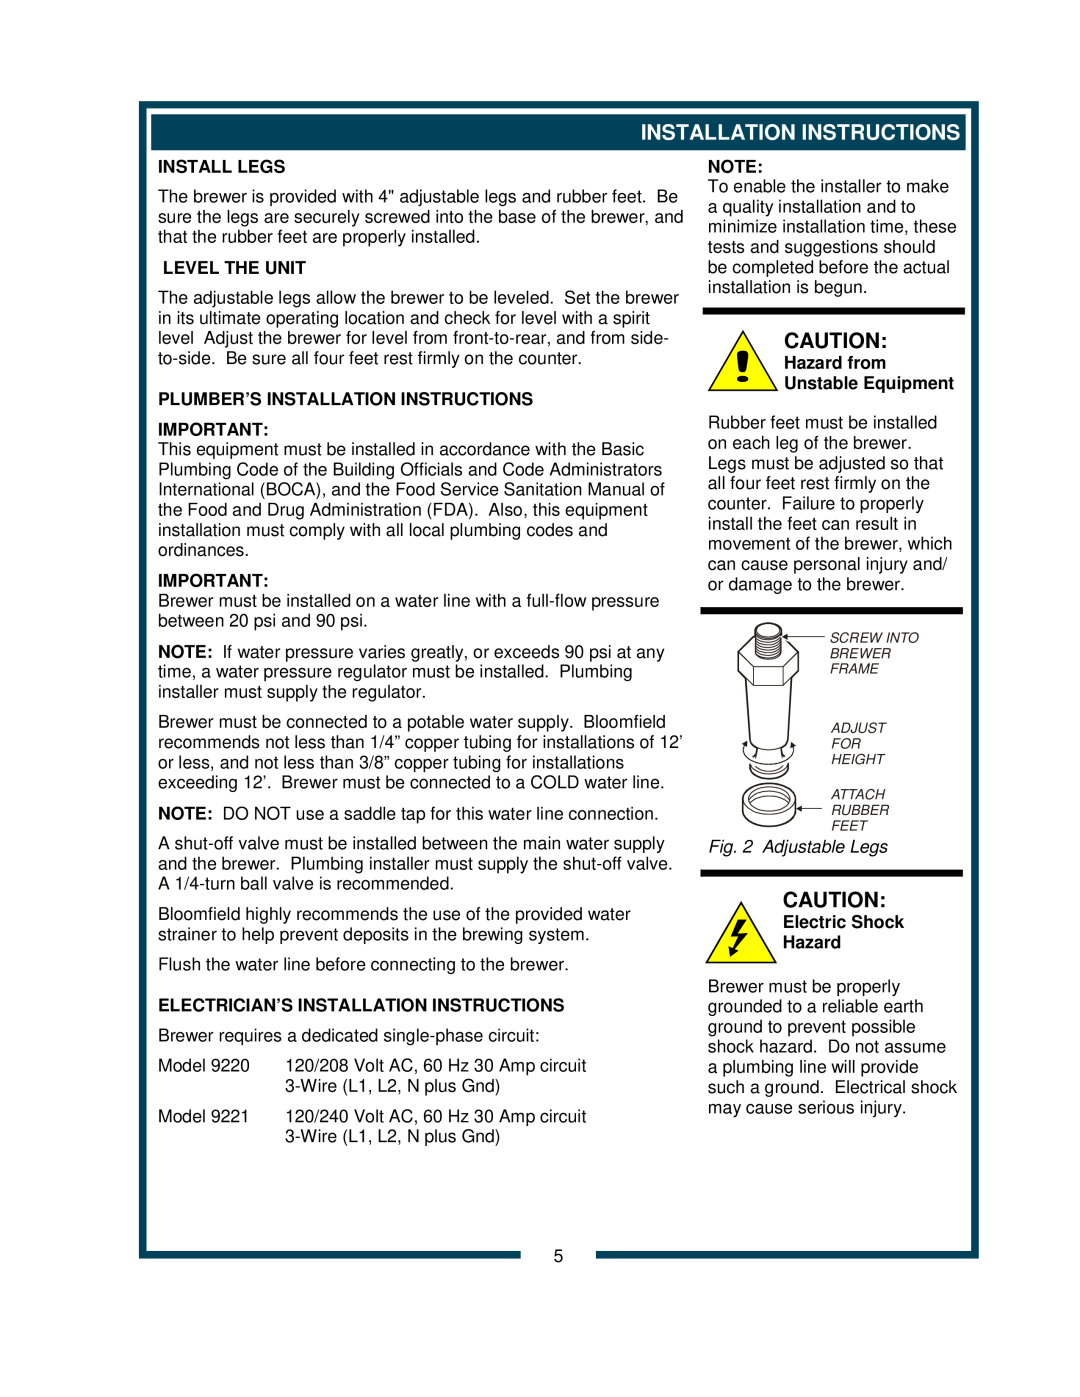 Bloomfield 9220 9221 Install Legs, Level The Unit, Plumber’S Installation Instructions, Hazard from Unstable Equipment 